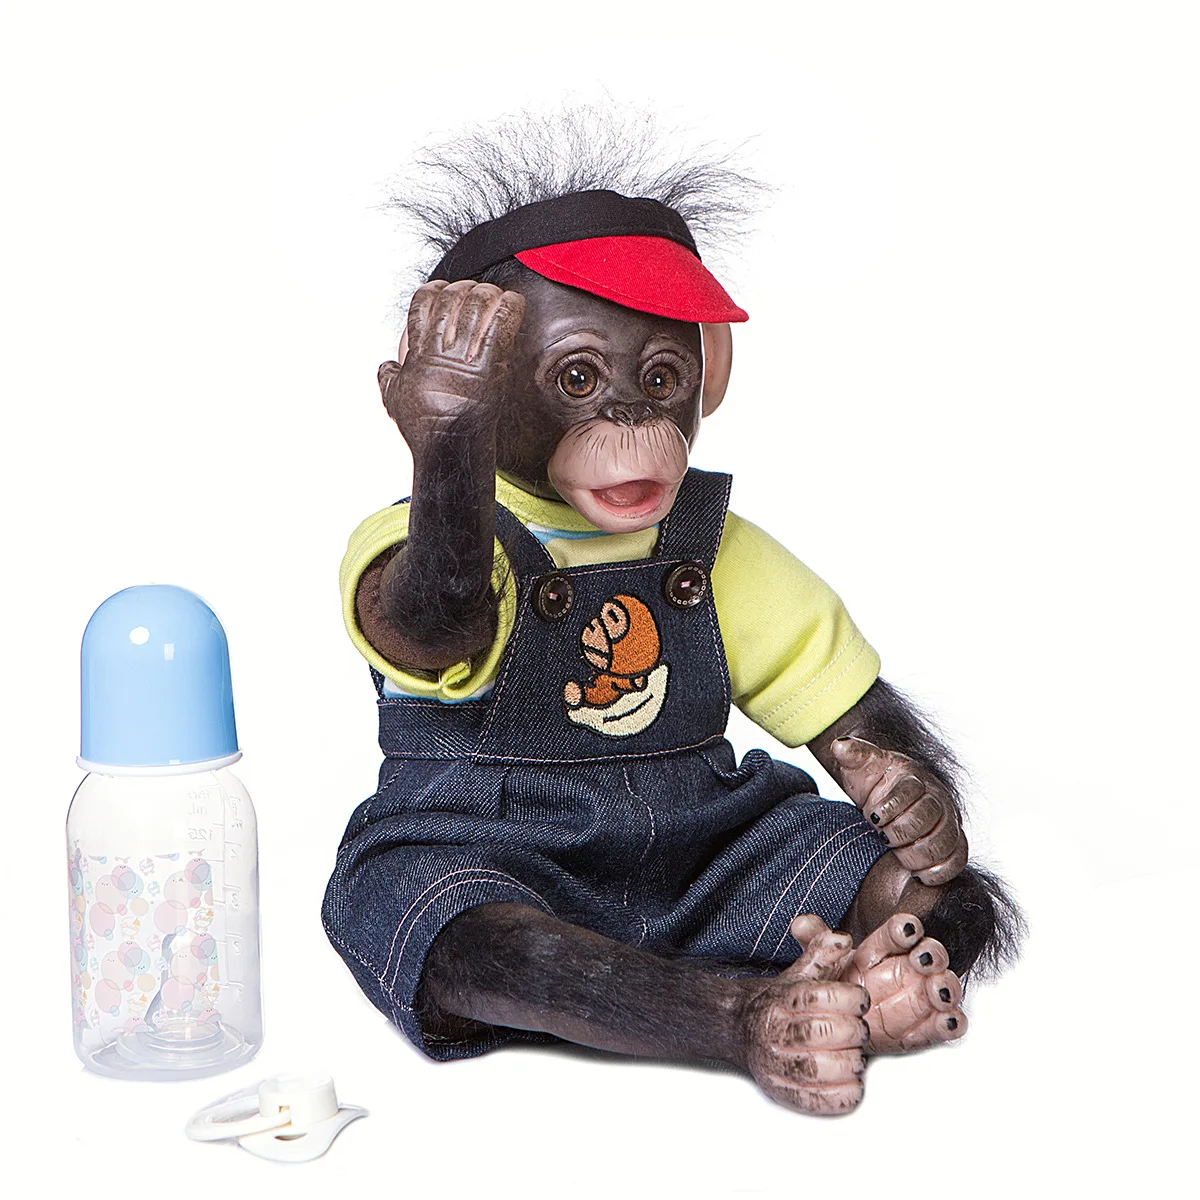 Mini Monkey Baby Twin Very Soft Flexible Silicone Reborn Premie Collecible Art Doll Detailed Hand Made Lifelike Children's Gifts baby hoppala zip zip walker hop children s swing flexible break free security material baby activity entertainment